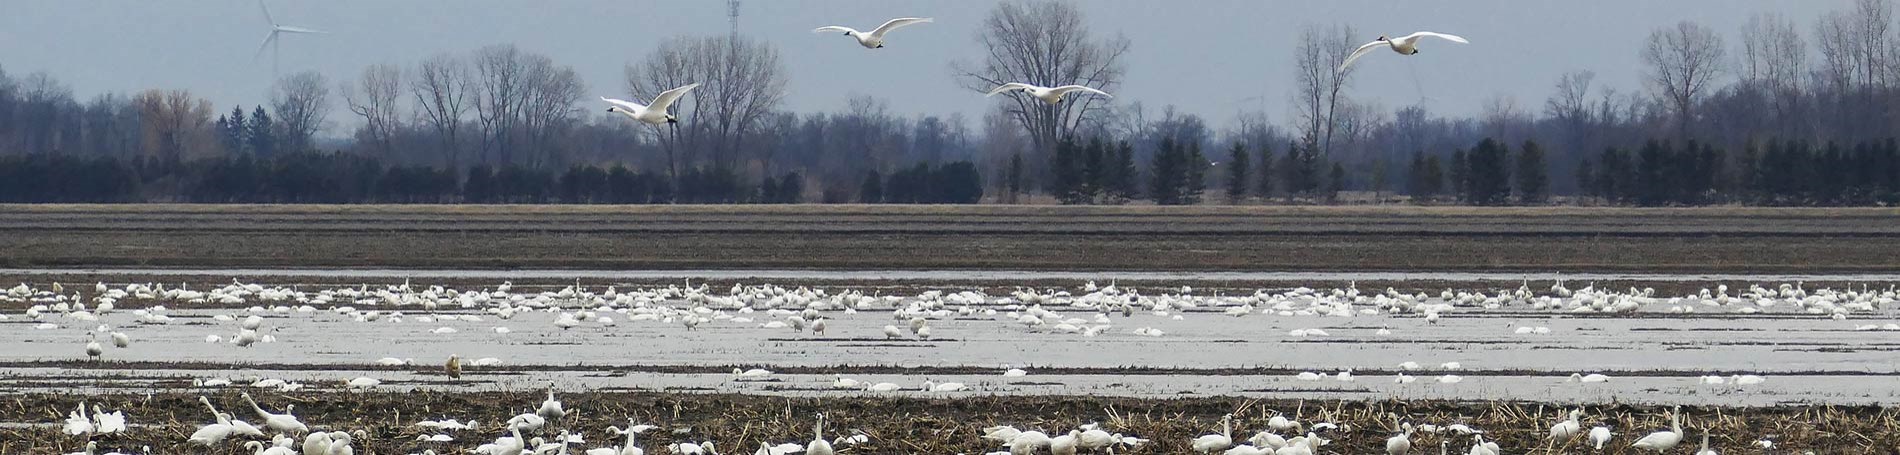 Swans flying and landing in field.